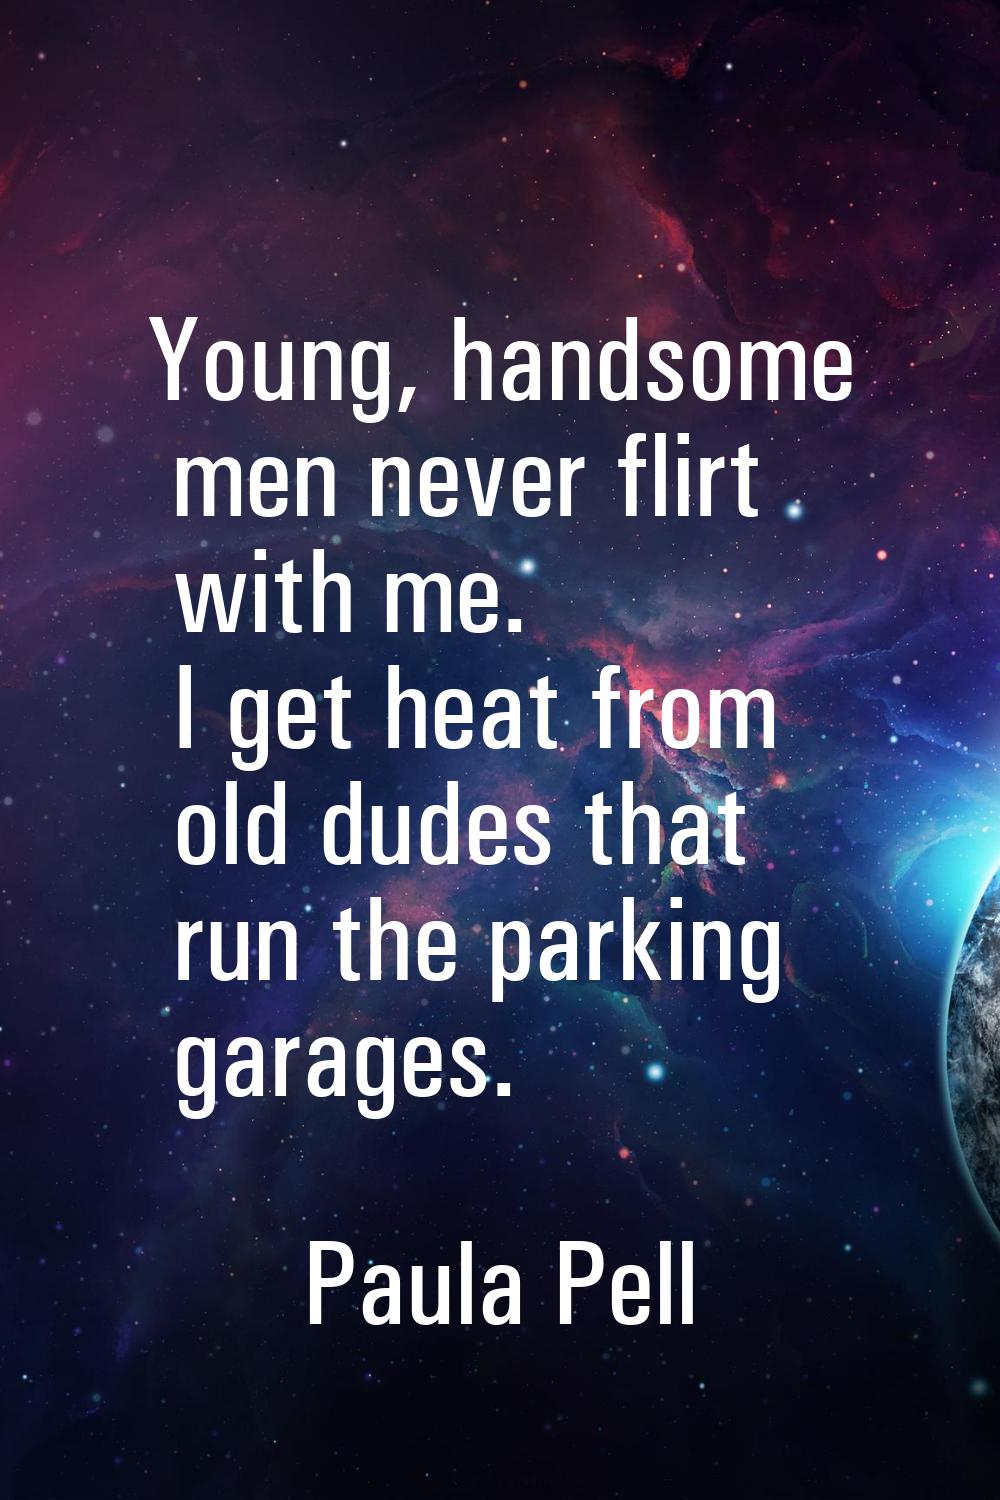 Young, handsome men never flirt with me. I get heat from old dudes that run the parking garages.